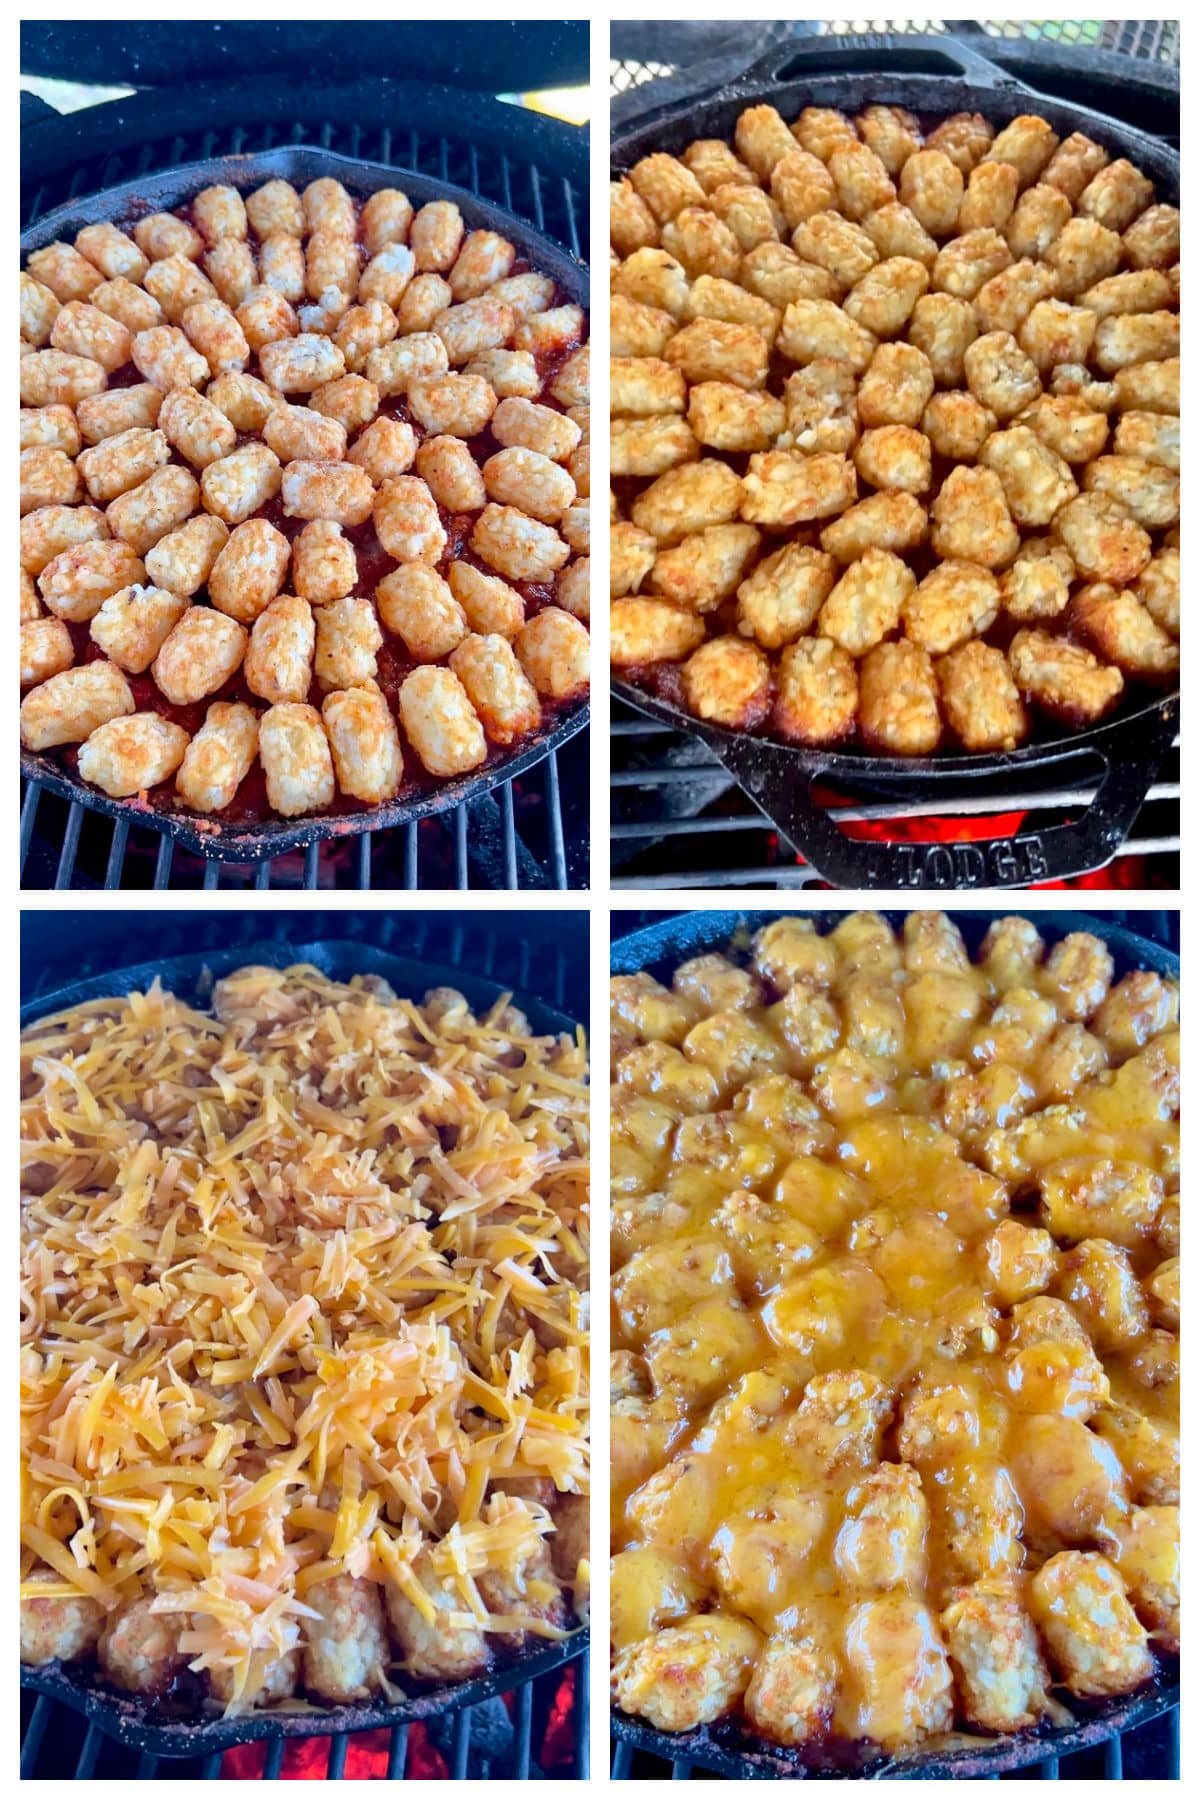 Collage making chili tater tot casserole on a grill.